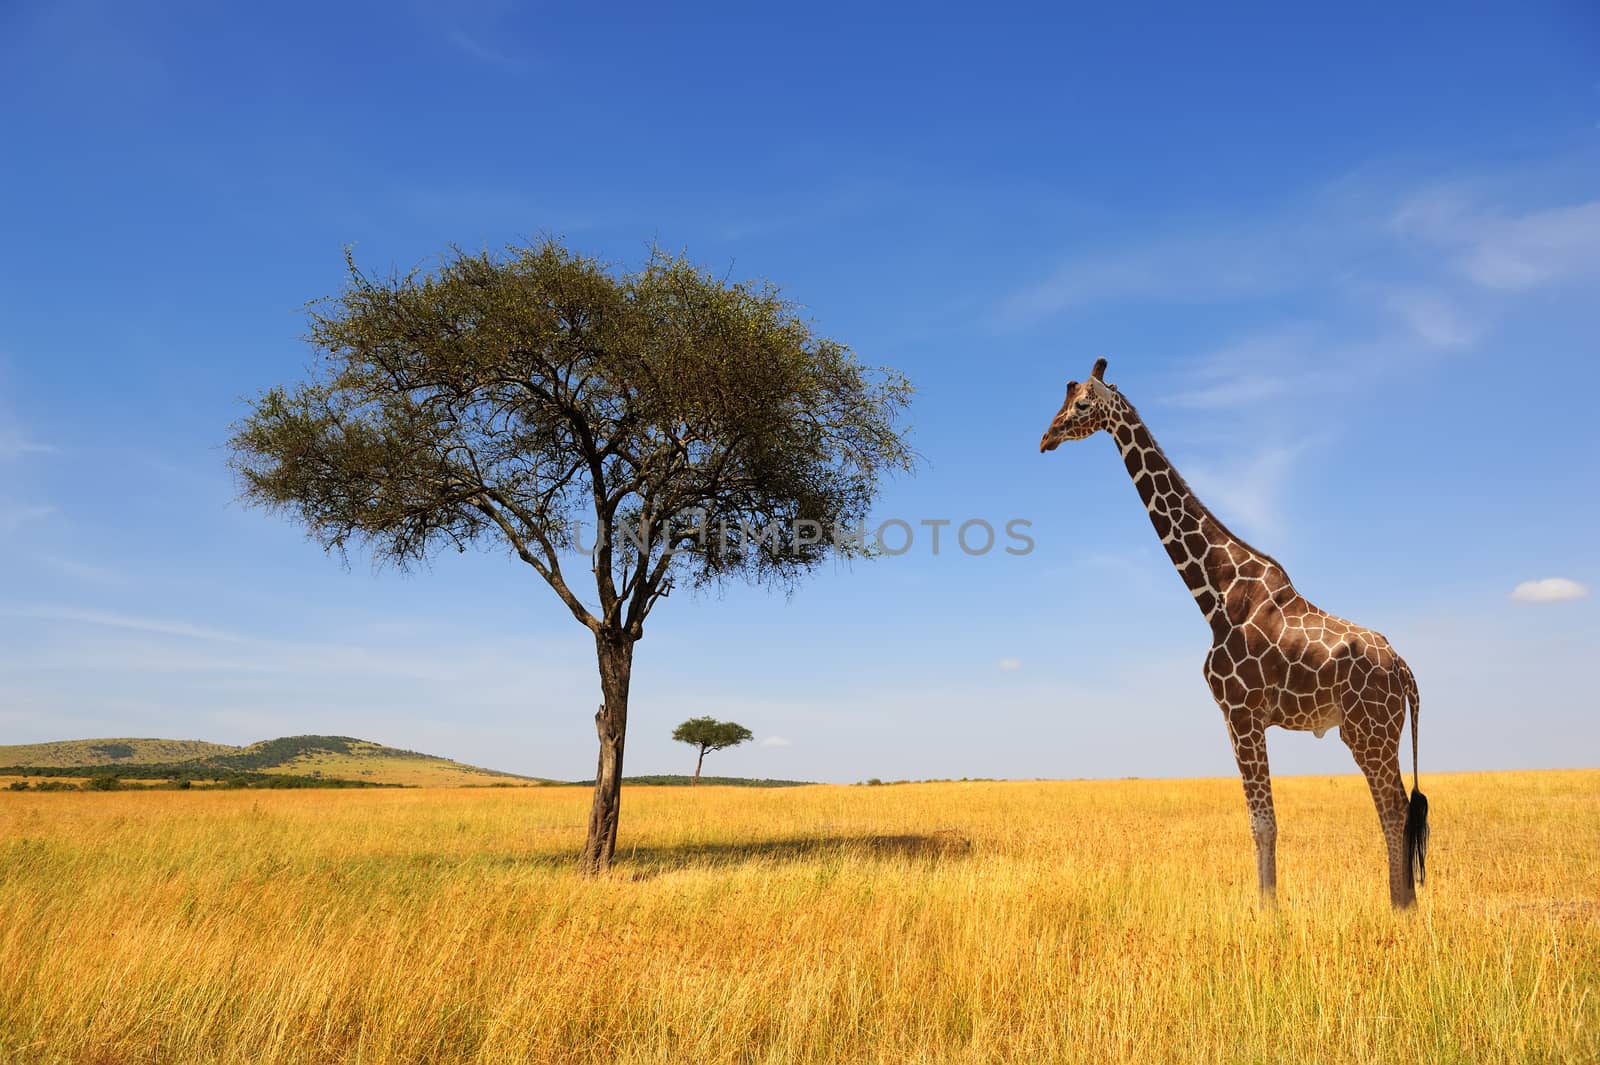 Landscape with tree and giraffe in Africa by byrdyak